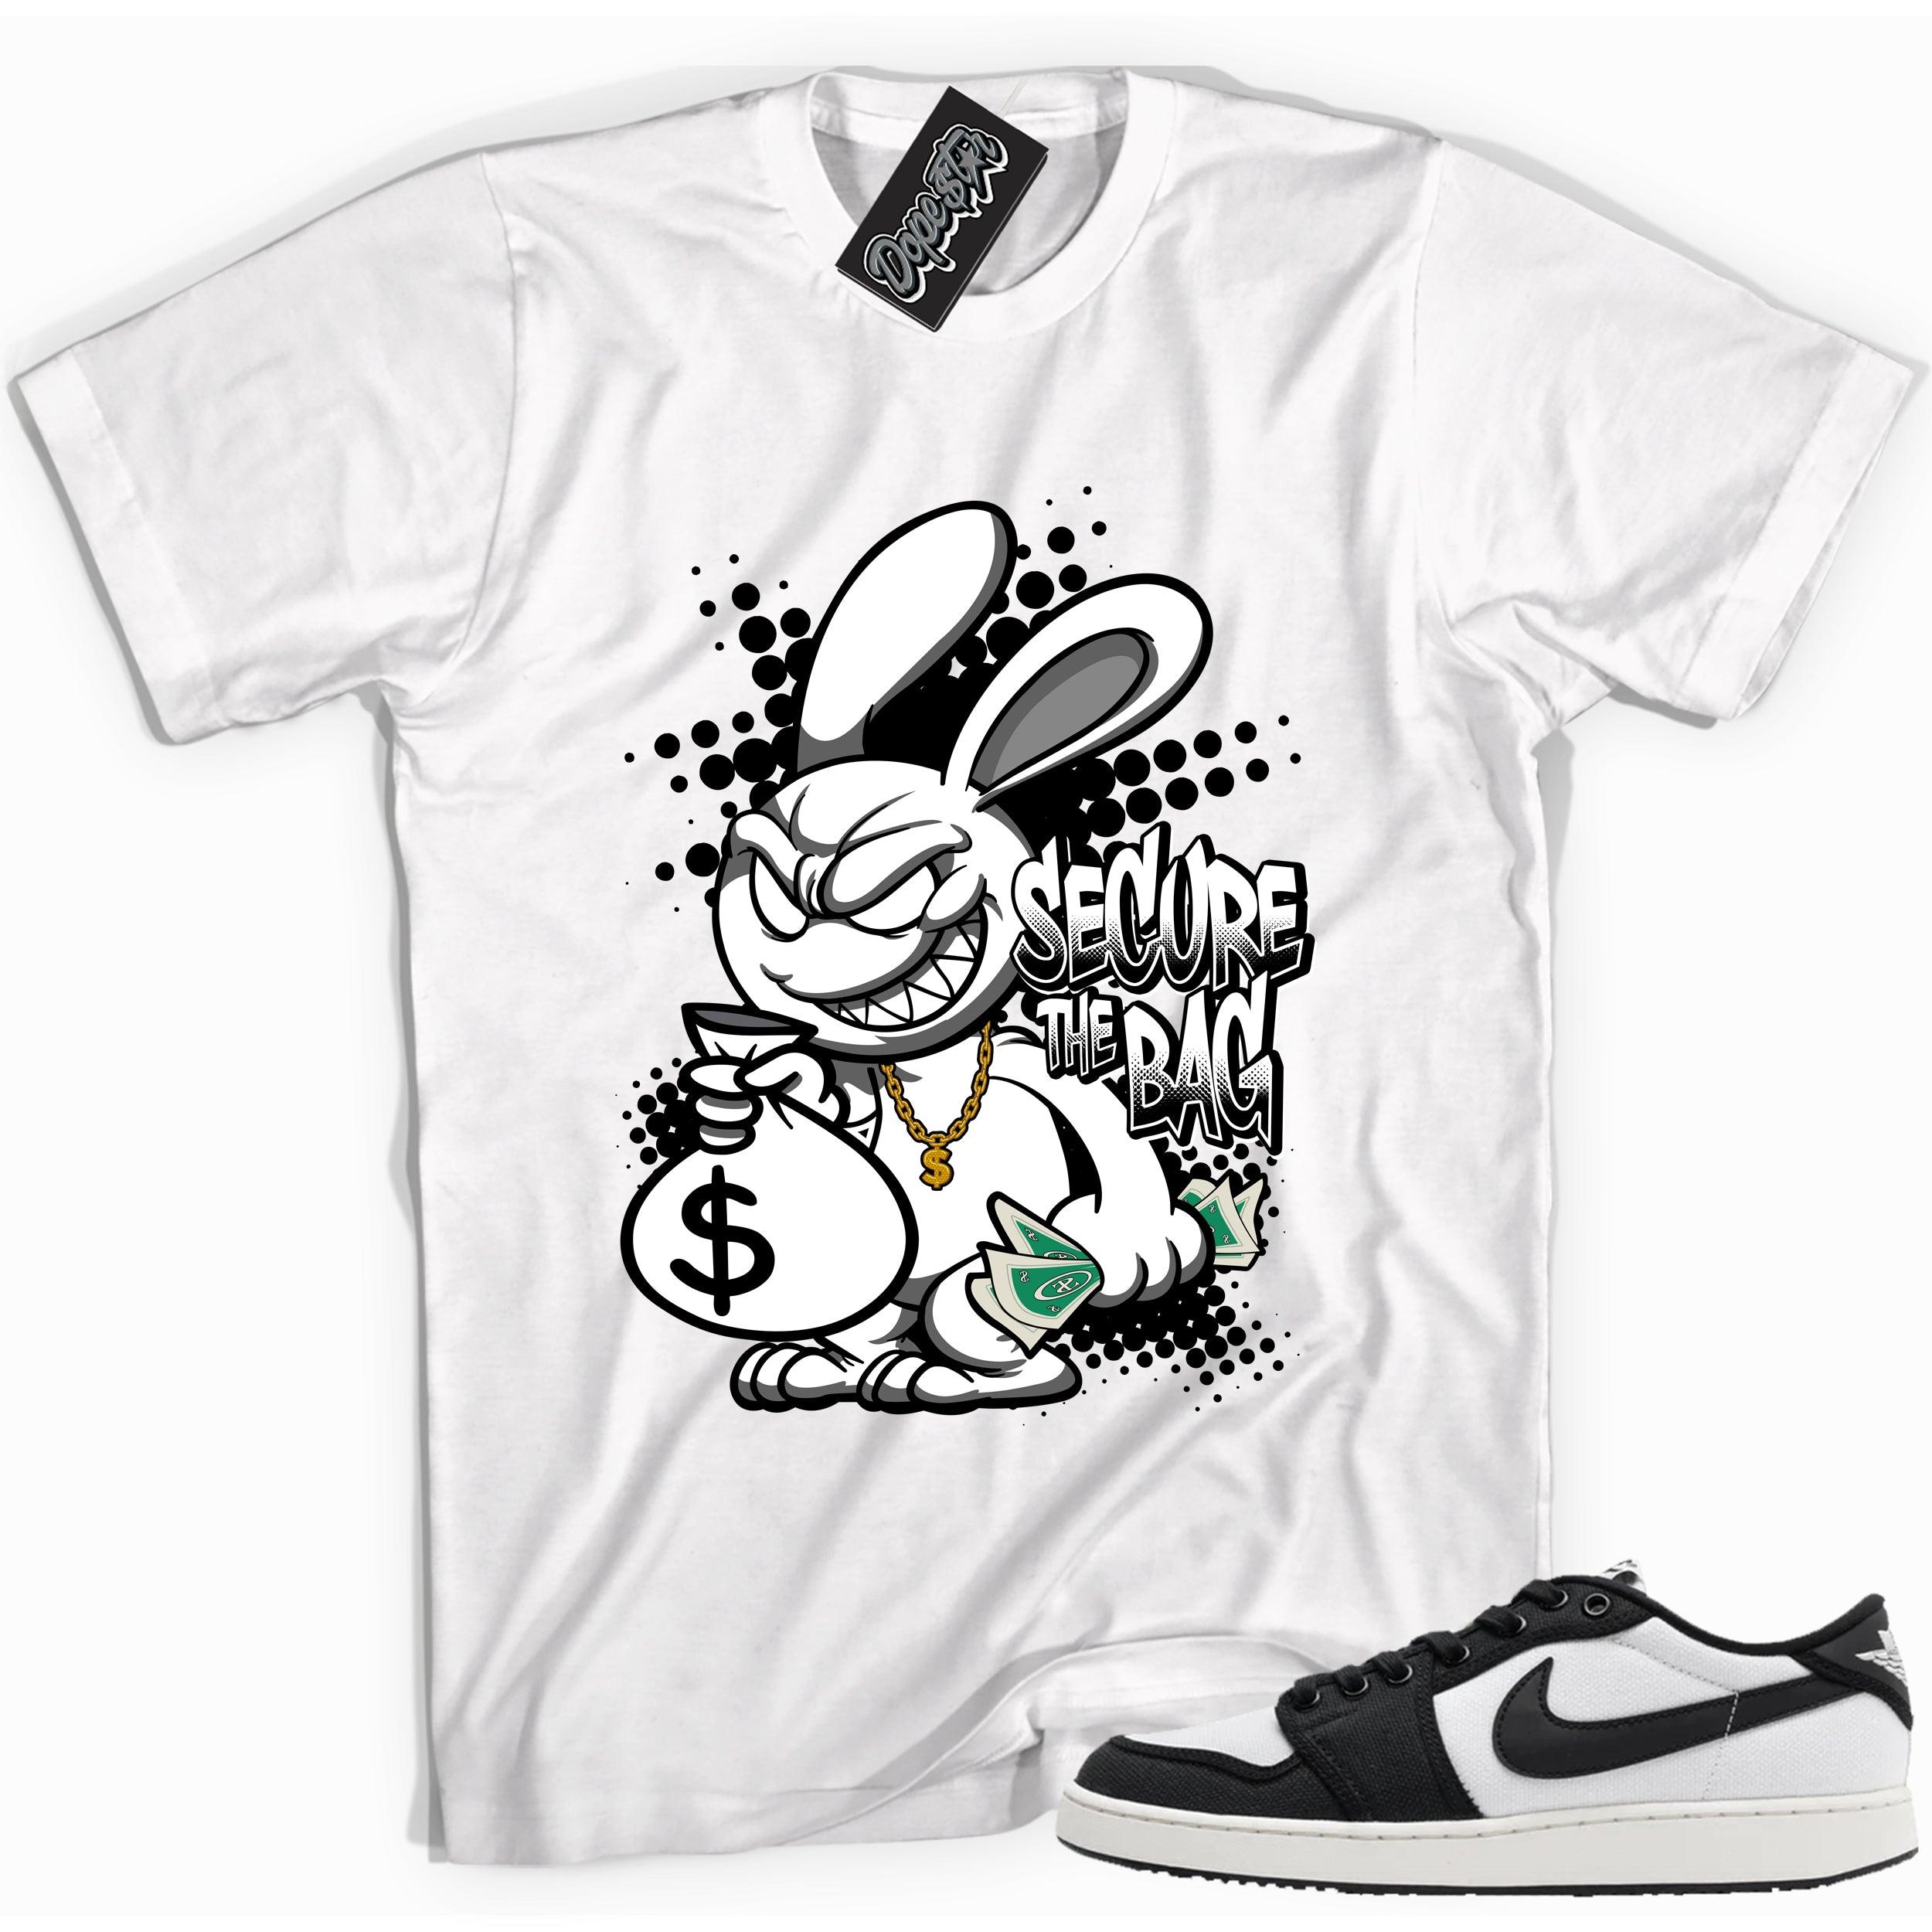 Cool white graphic tee with 'secure the bag' print, that perfectly matches Air Jordan 1 Retro Ajko Low Black & White sneakers.